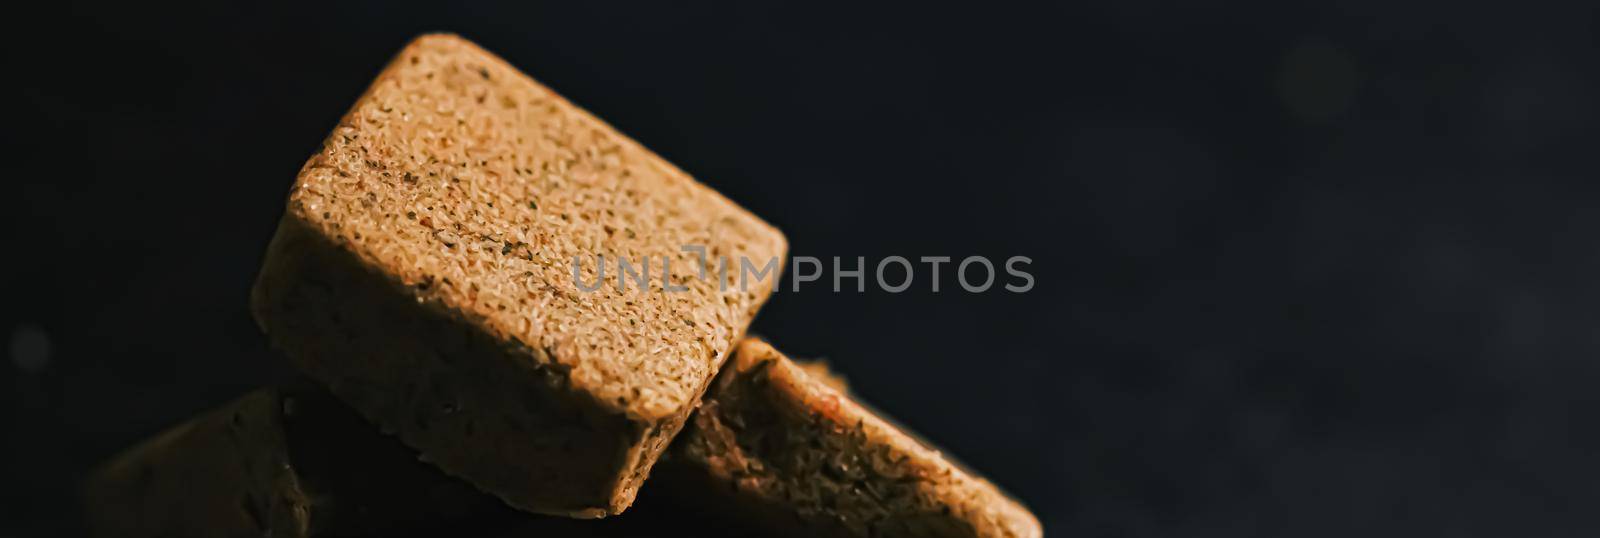 Vegetable bouillon cubes on stone kitchen board, stock or broth ingredient for soup, closeup